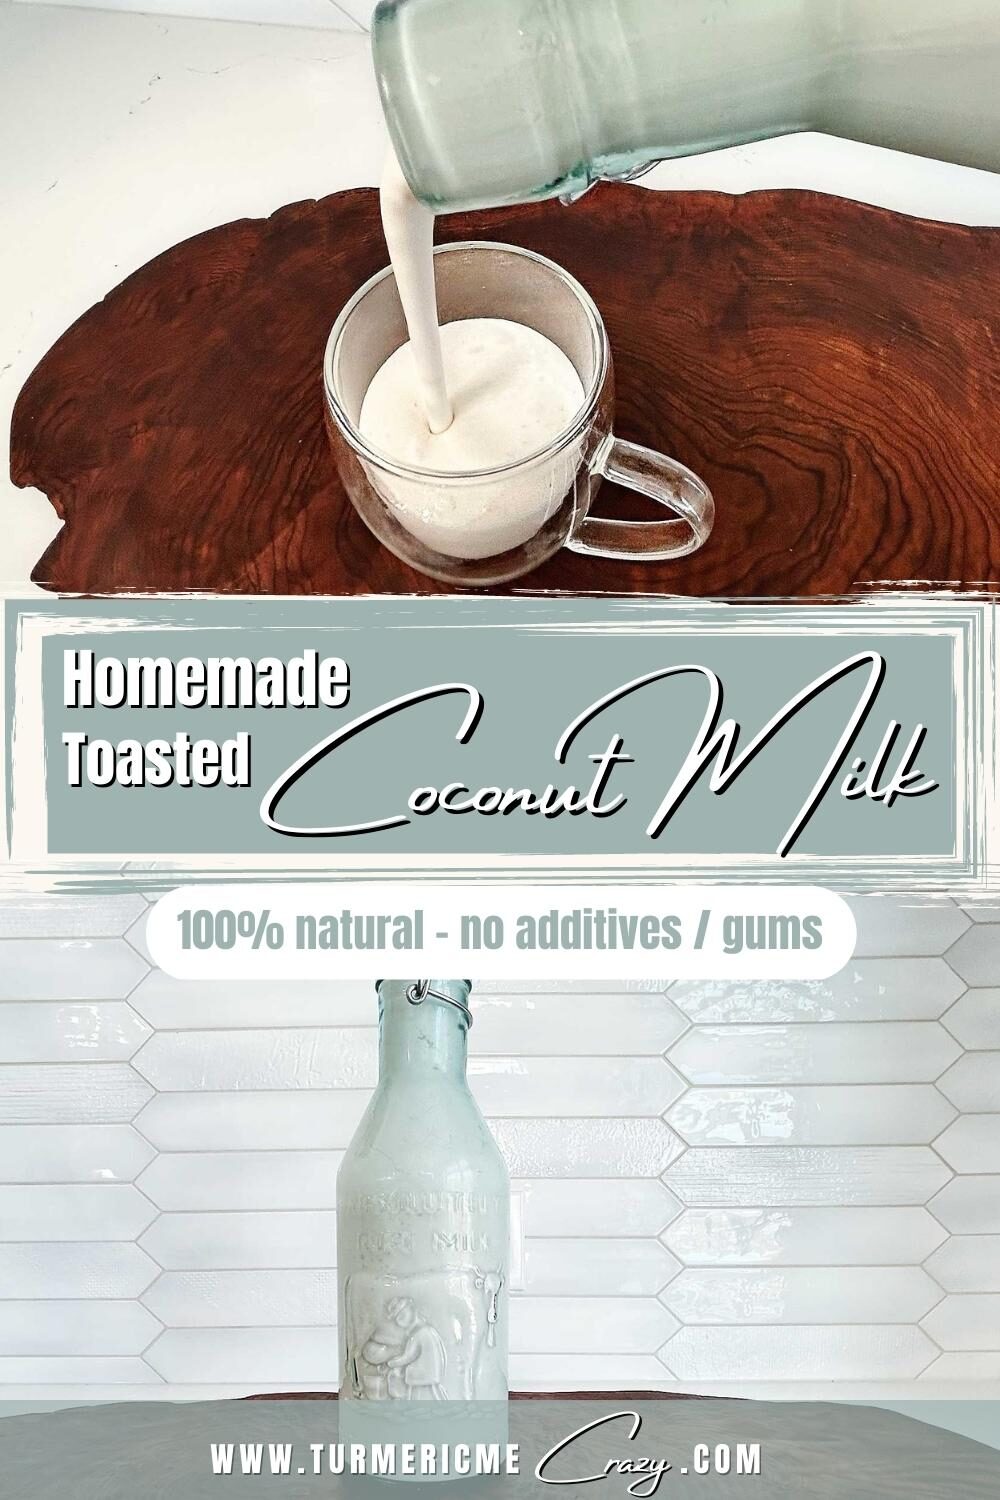 Easily make your own incredibly creamy & delicious coconut milk, a lovely plant based milk, in 3 simple steps from just organic shredded coconut! Let us show you how! It's 100% natural coconut milk with no additives, preservatives, emulsifiers or gums! Give it a try and I promise, you'll never buy store bought again!